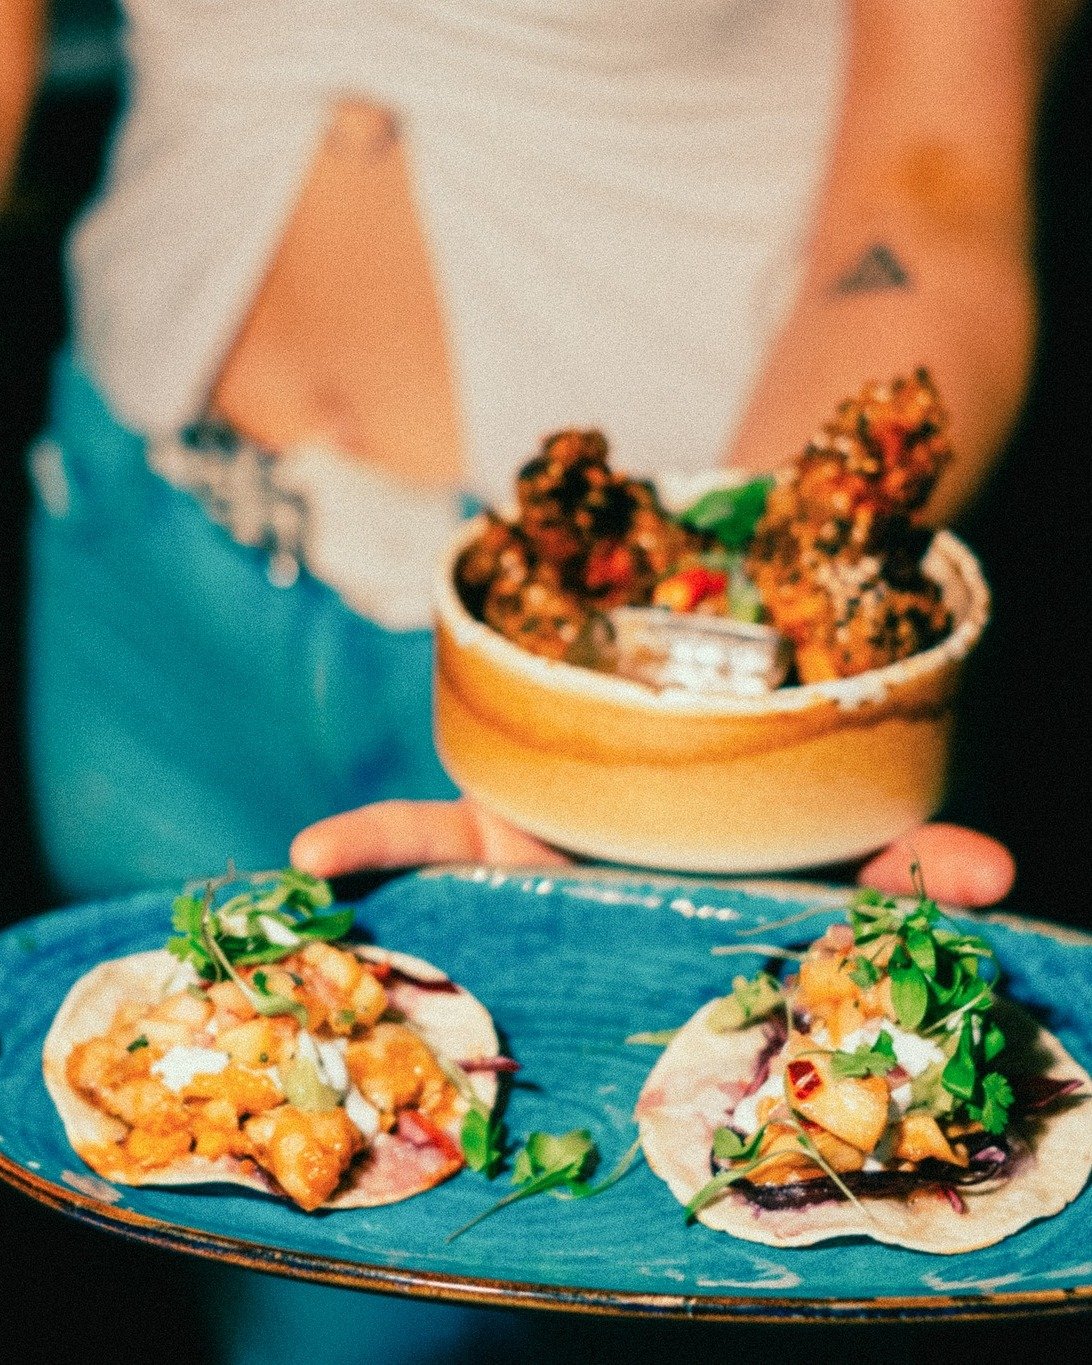 Missed out on Surf Club last week? 🌊 Don't worry it's every Sunday! Enjoy 2-4-1 on Tacos &amp; Cocktails ALL DAY! 😍 (It's only &pound;2 per Taco!) 

Available for walk-ins + bookings (Booking link is in bio)

.
.
.

  #ne1food #newcastlefoodies #ne